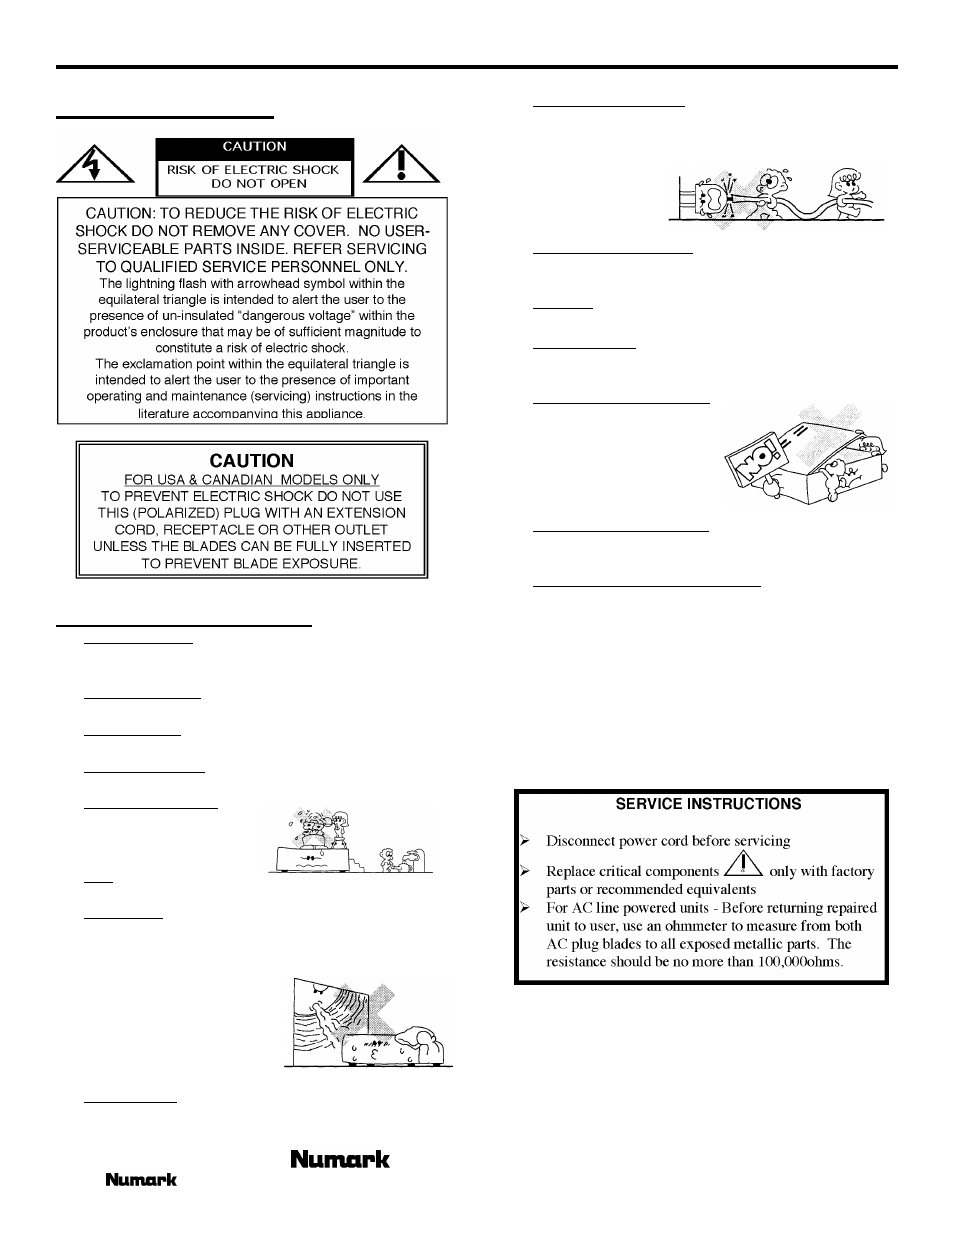 Safety information, Safety instructions | Numark Industries RM6 User Manual | Page 2 / 8